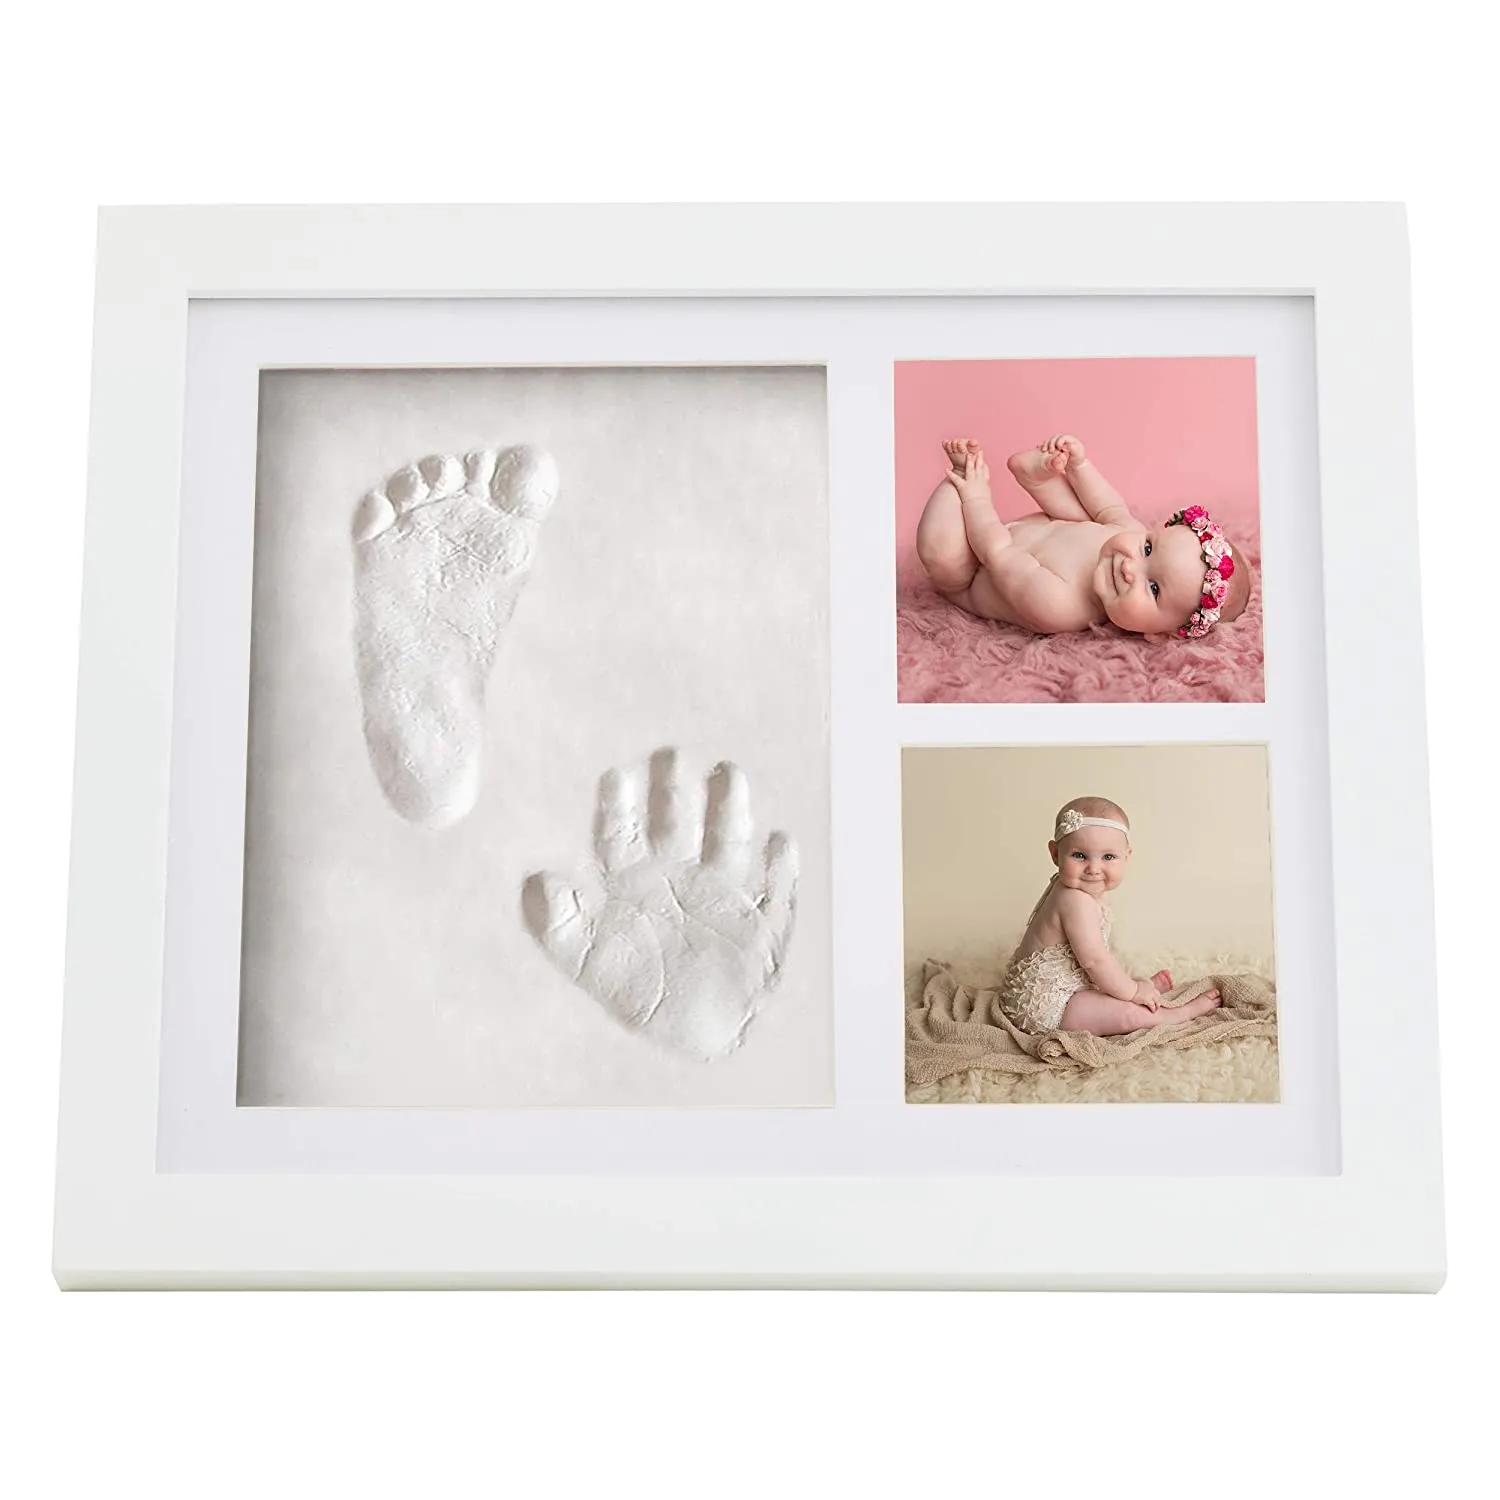 Baby Hand and Footprint Picture Frame Kit Baby Shower or Christening Gift Memorable Keepsakes Gift for New Born Toddlers Birthday presents Premium Clay & Wood Frames with 6 pack of Clay 